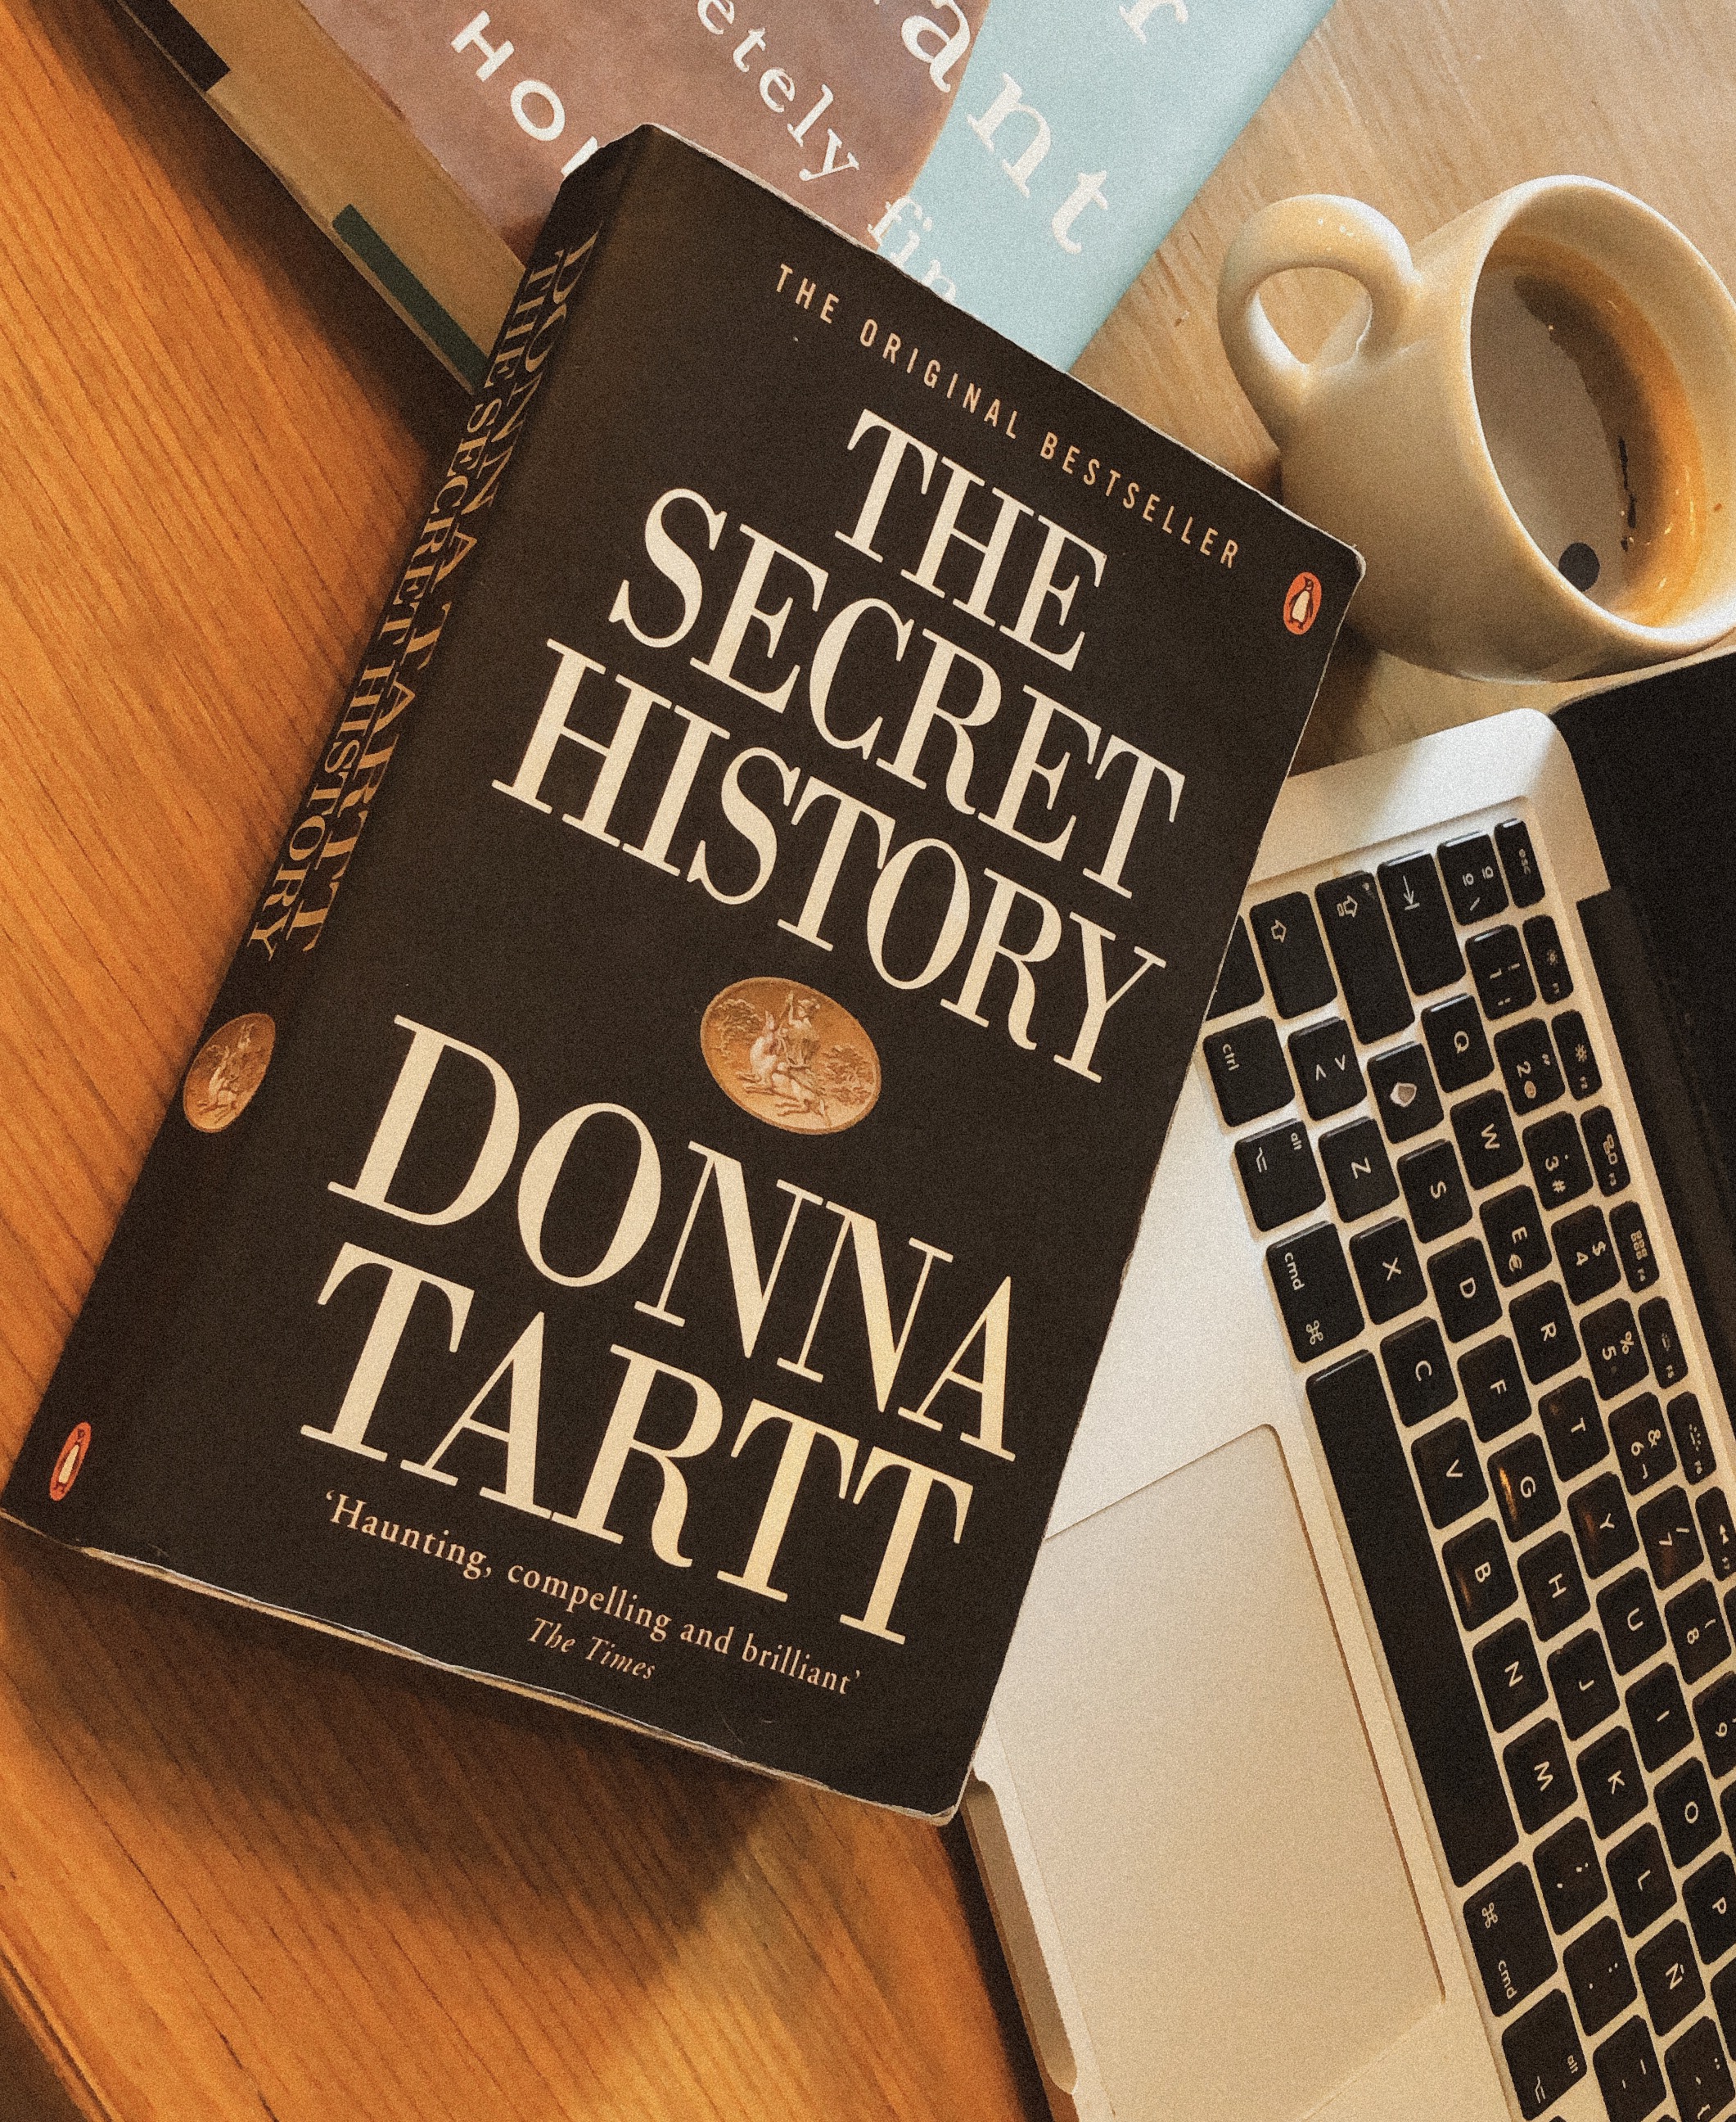 Book Review: The Secret History by Donna Tartt